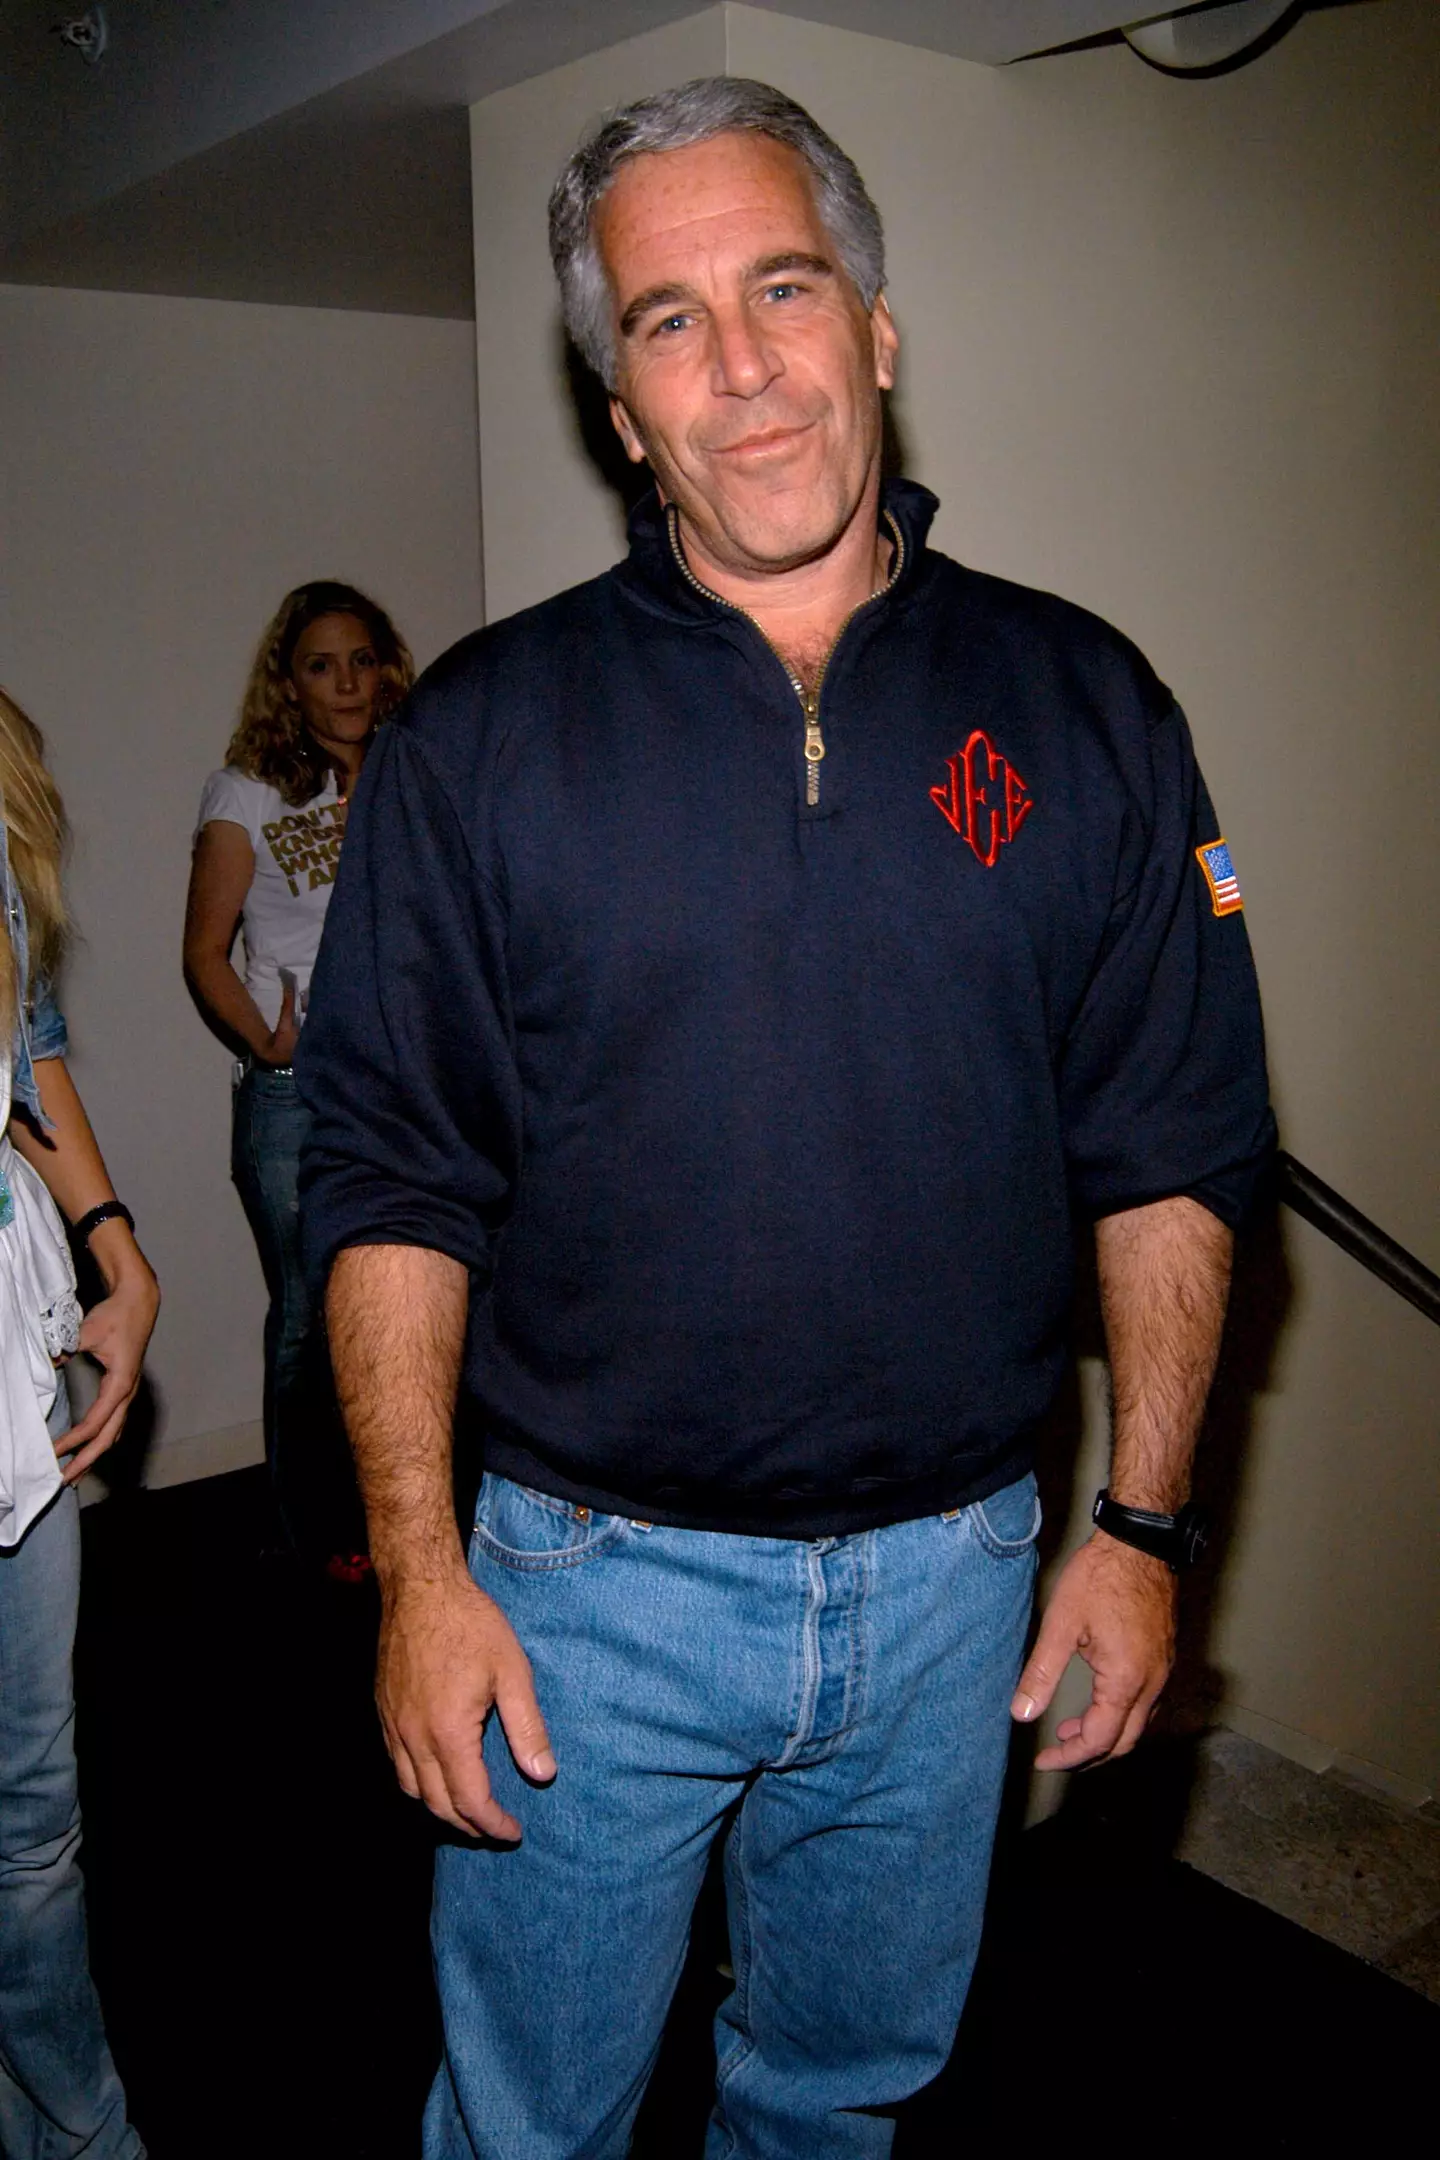 Jeffrey Epstein was found dead in his cell at the Metropolitan Correctional Center in 2019.